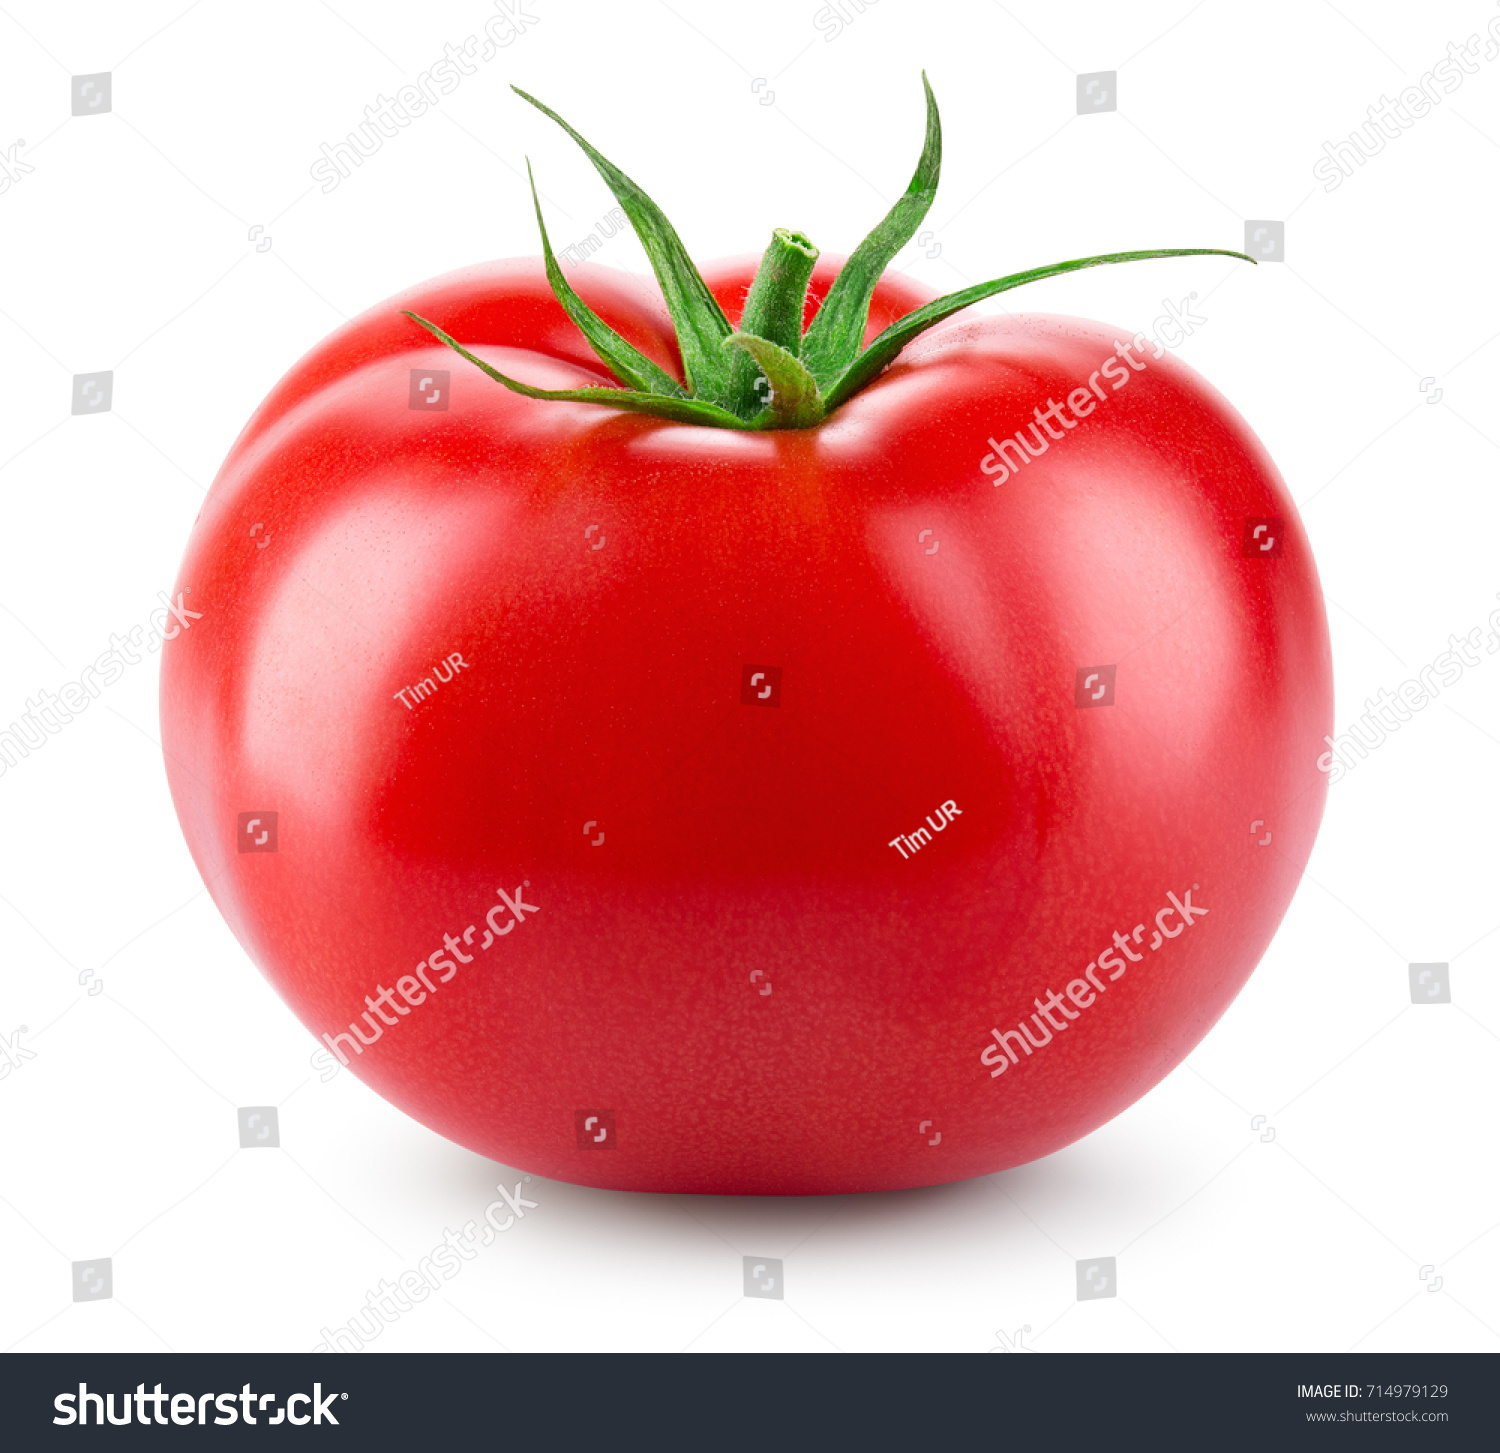 Tomato isolated. Fresh tomato. With clipping path. Full depth of field. #714979129